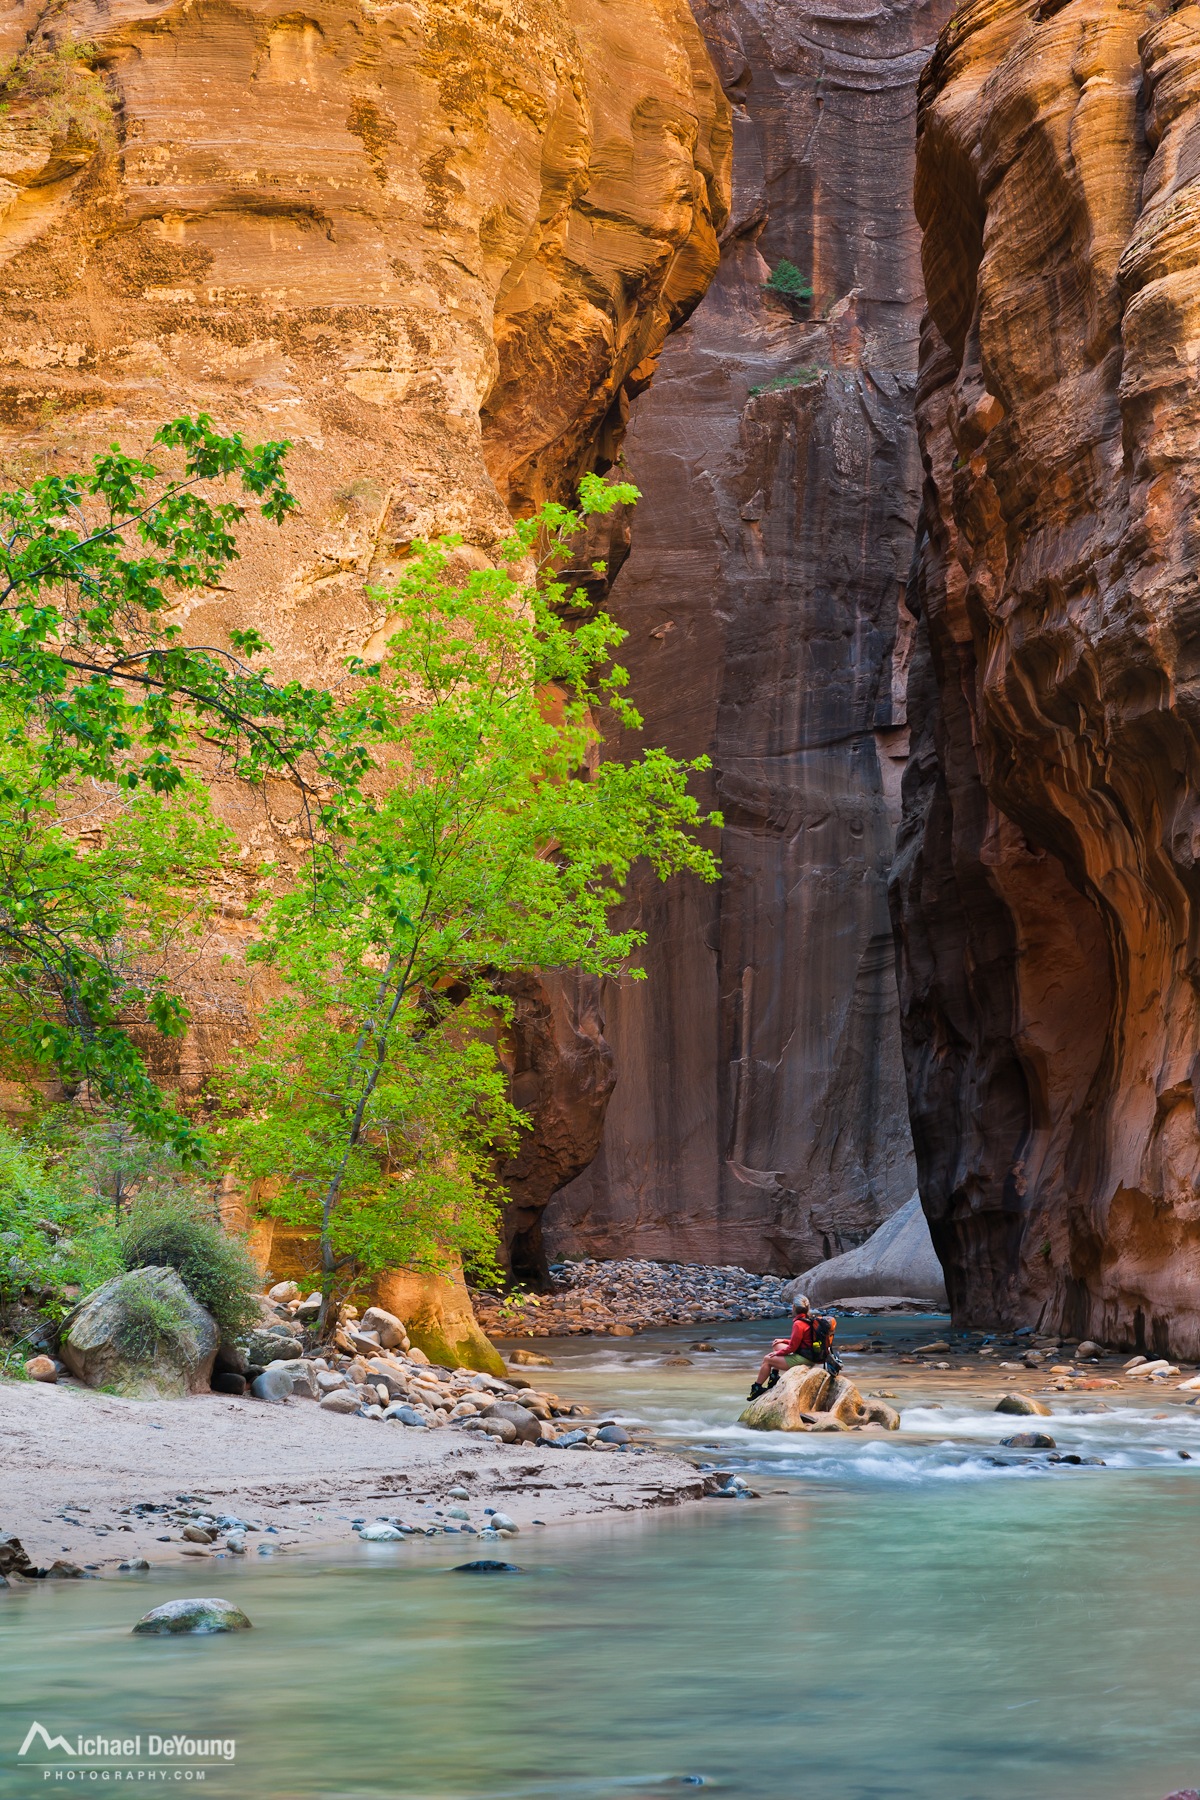 Meet your guide at the trailhead and hop on . Guided Tour Of The Narrows In Zion National Park